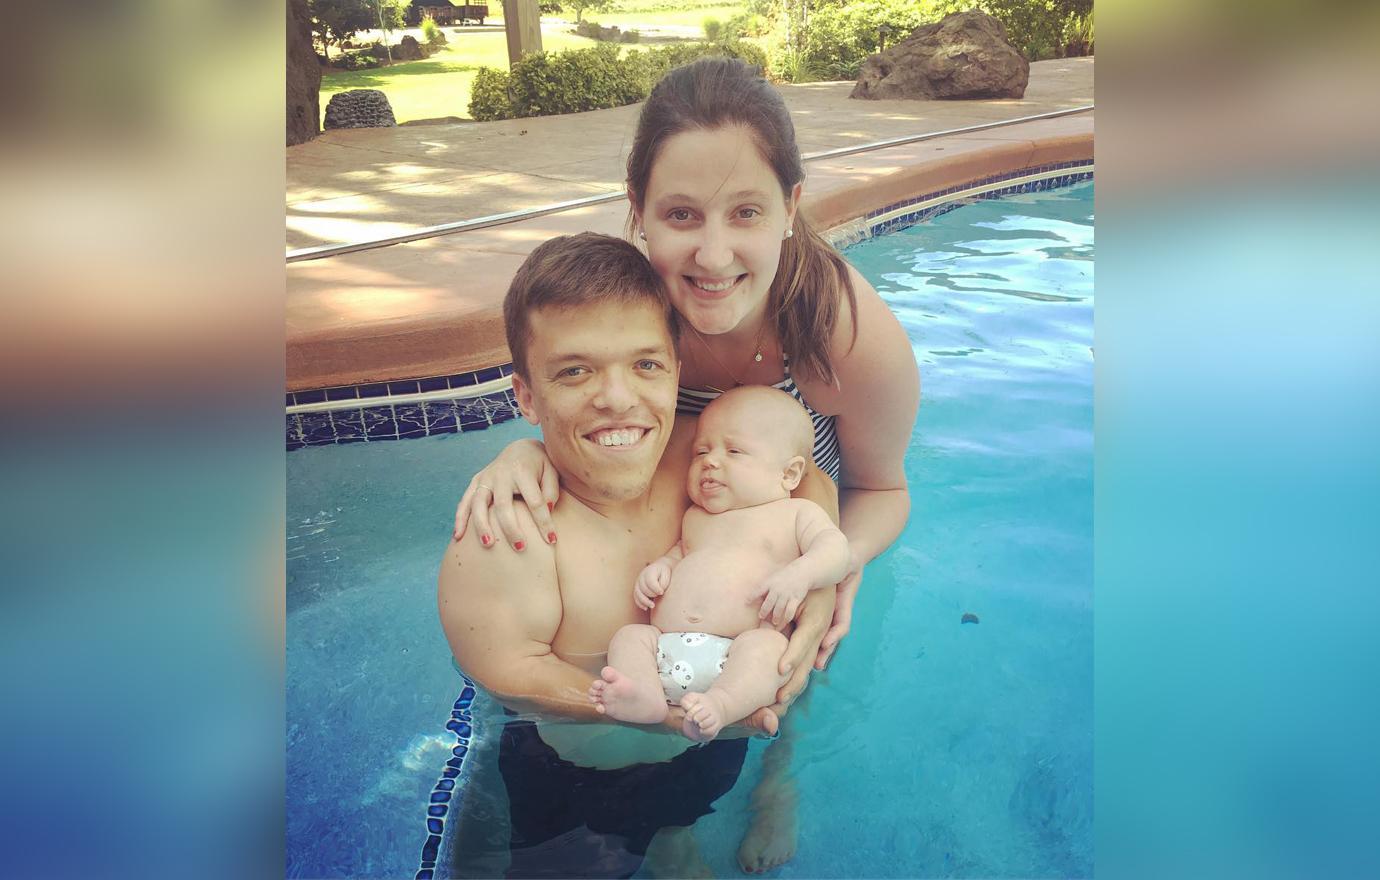 Zach Roloff Death Hoax: False Suicide Claims Came from Obscure